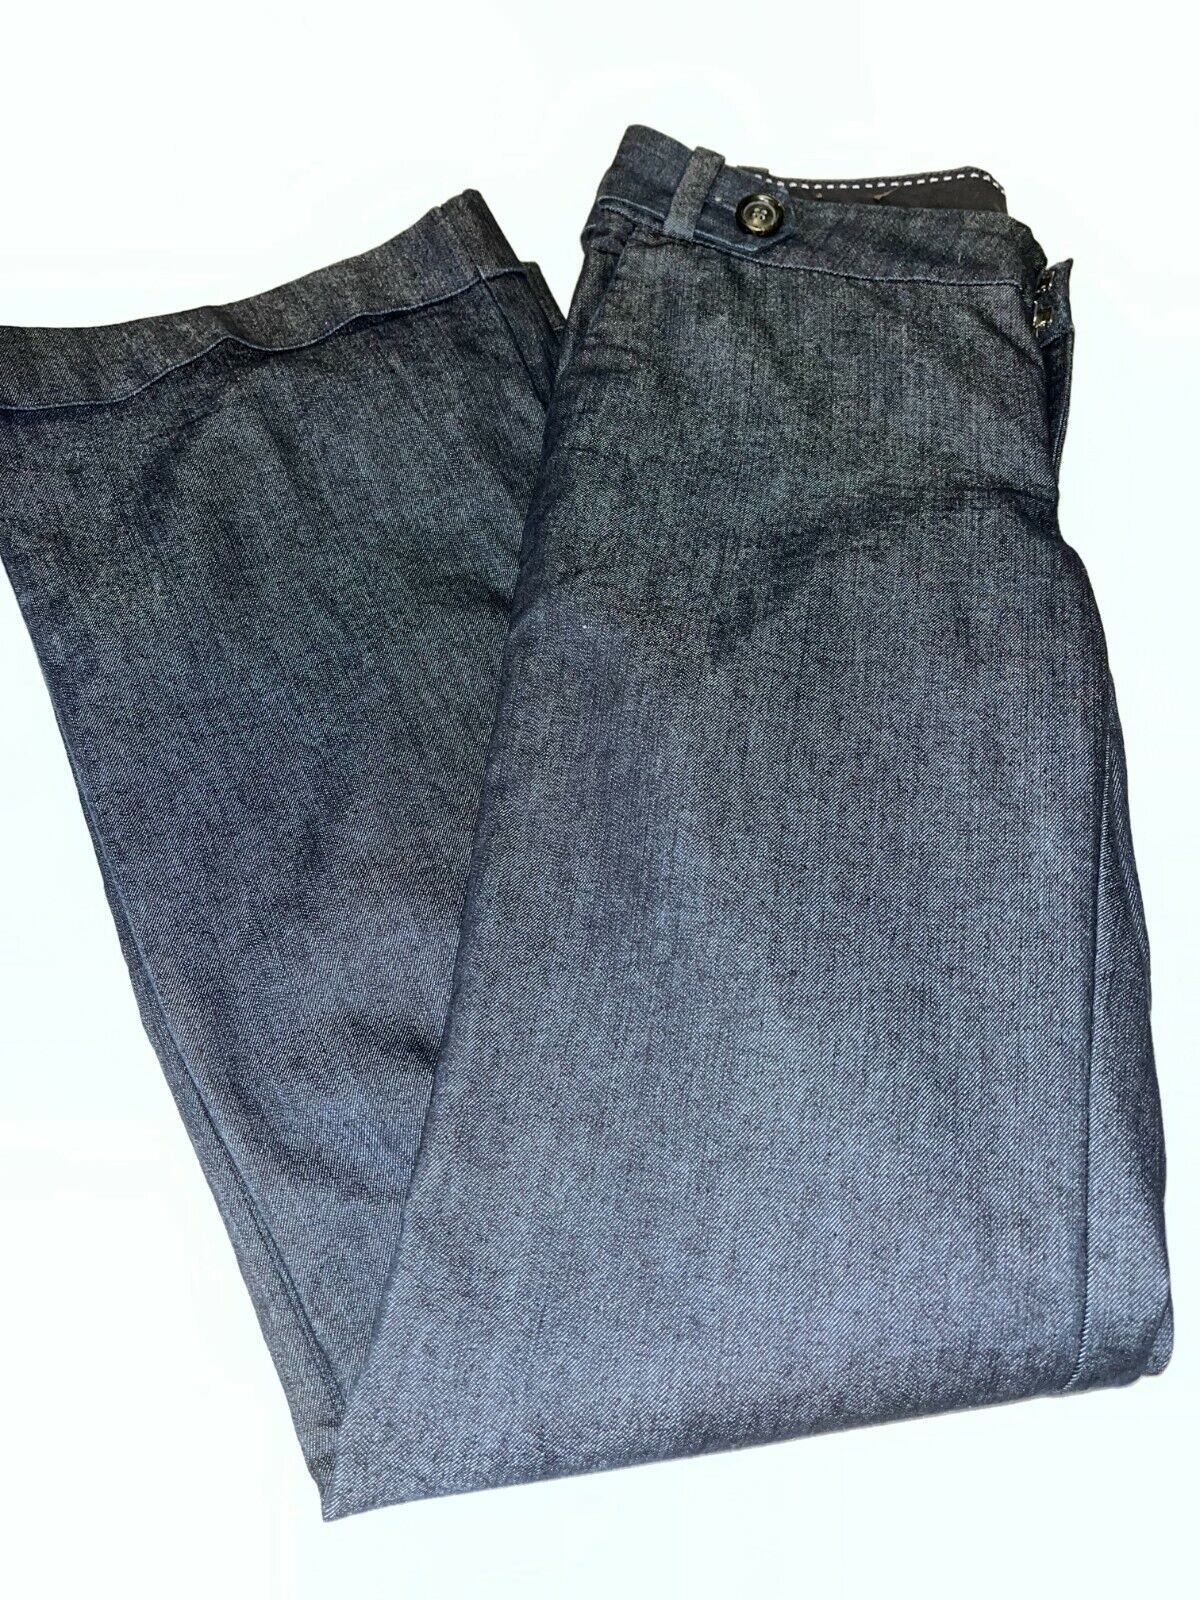 Primary image for Banana Republic Women's Classic Trouser Leg Cuffed Jeans Size 8 NWT